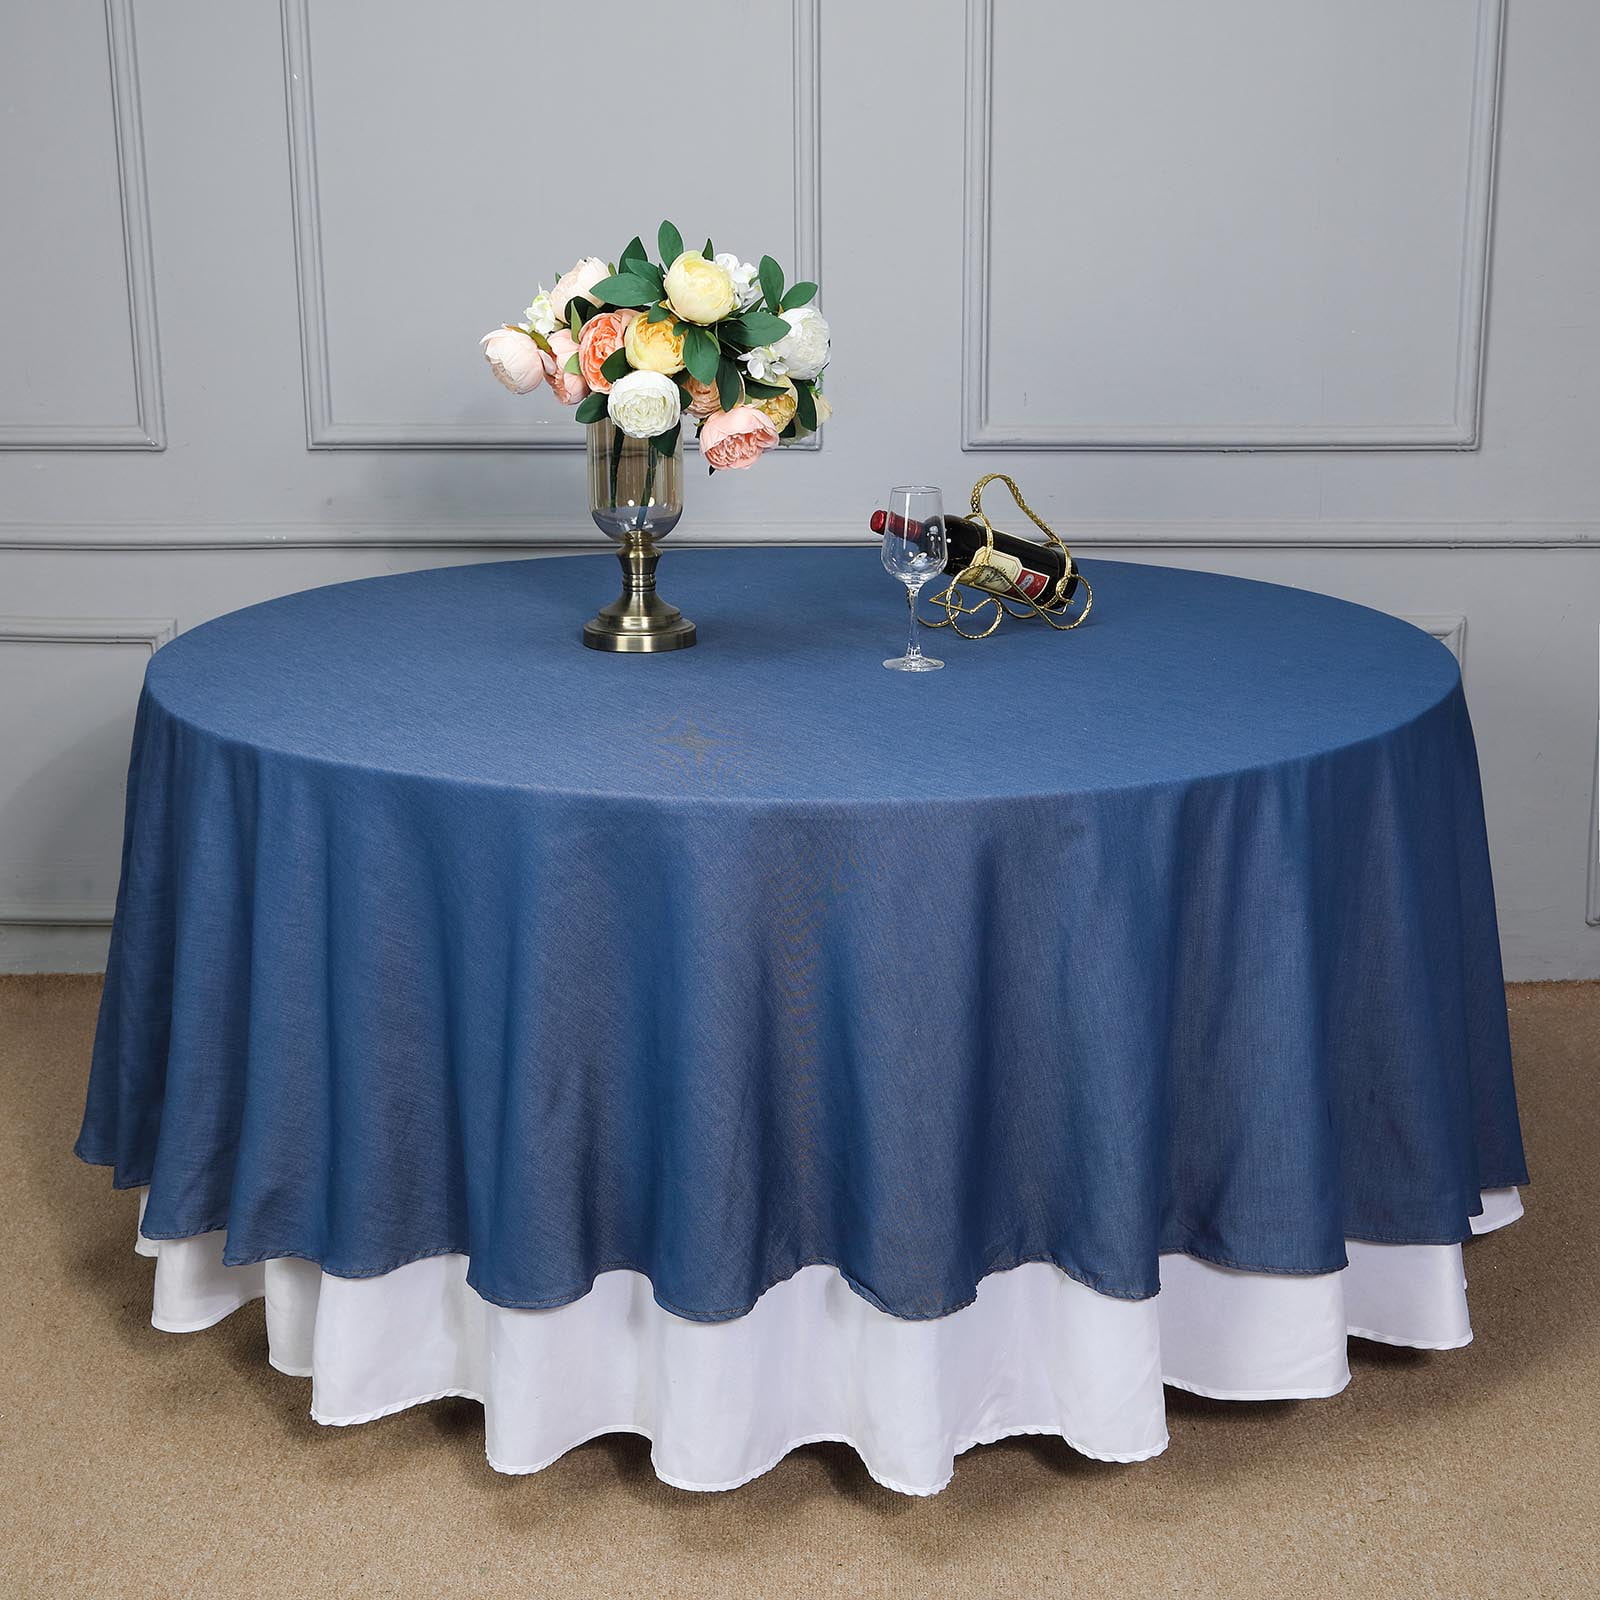 Details about   5-Foot Folding Party Ice Table with Tablecloth 